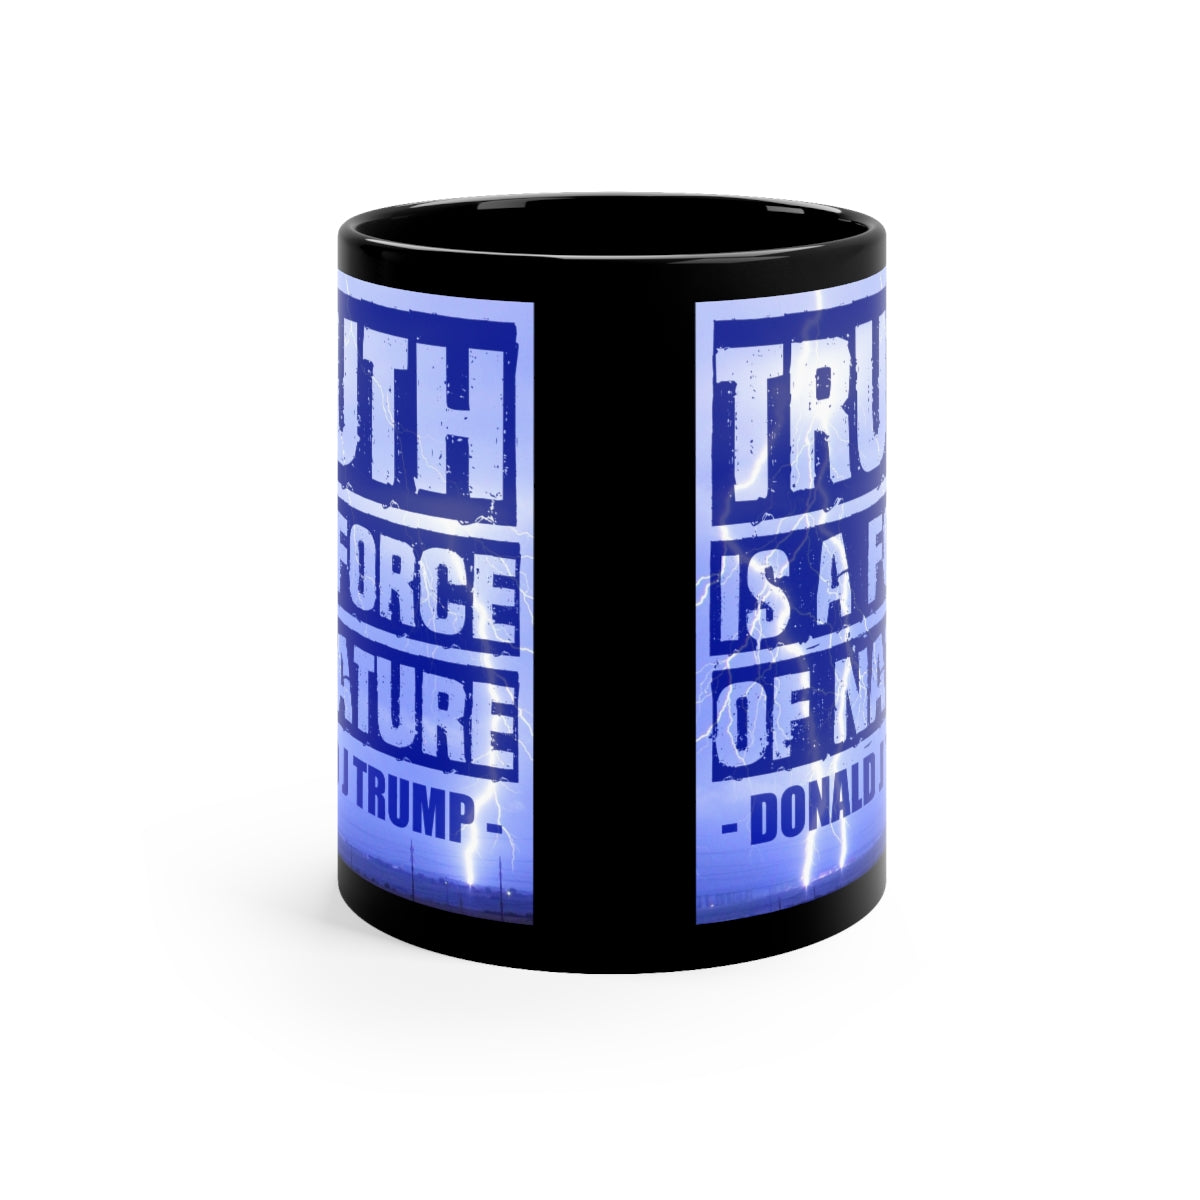 Truth Is A Force Of Nature | 11oz Black Mug - Rise of The New Media